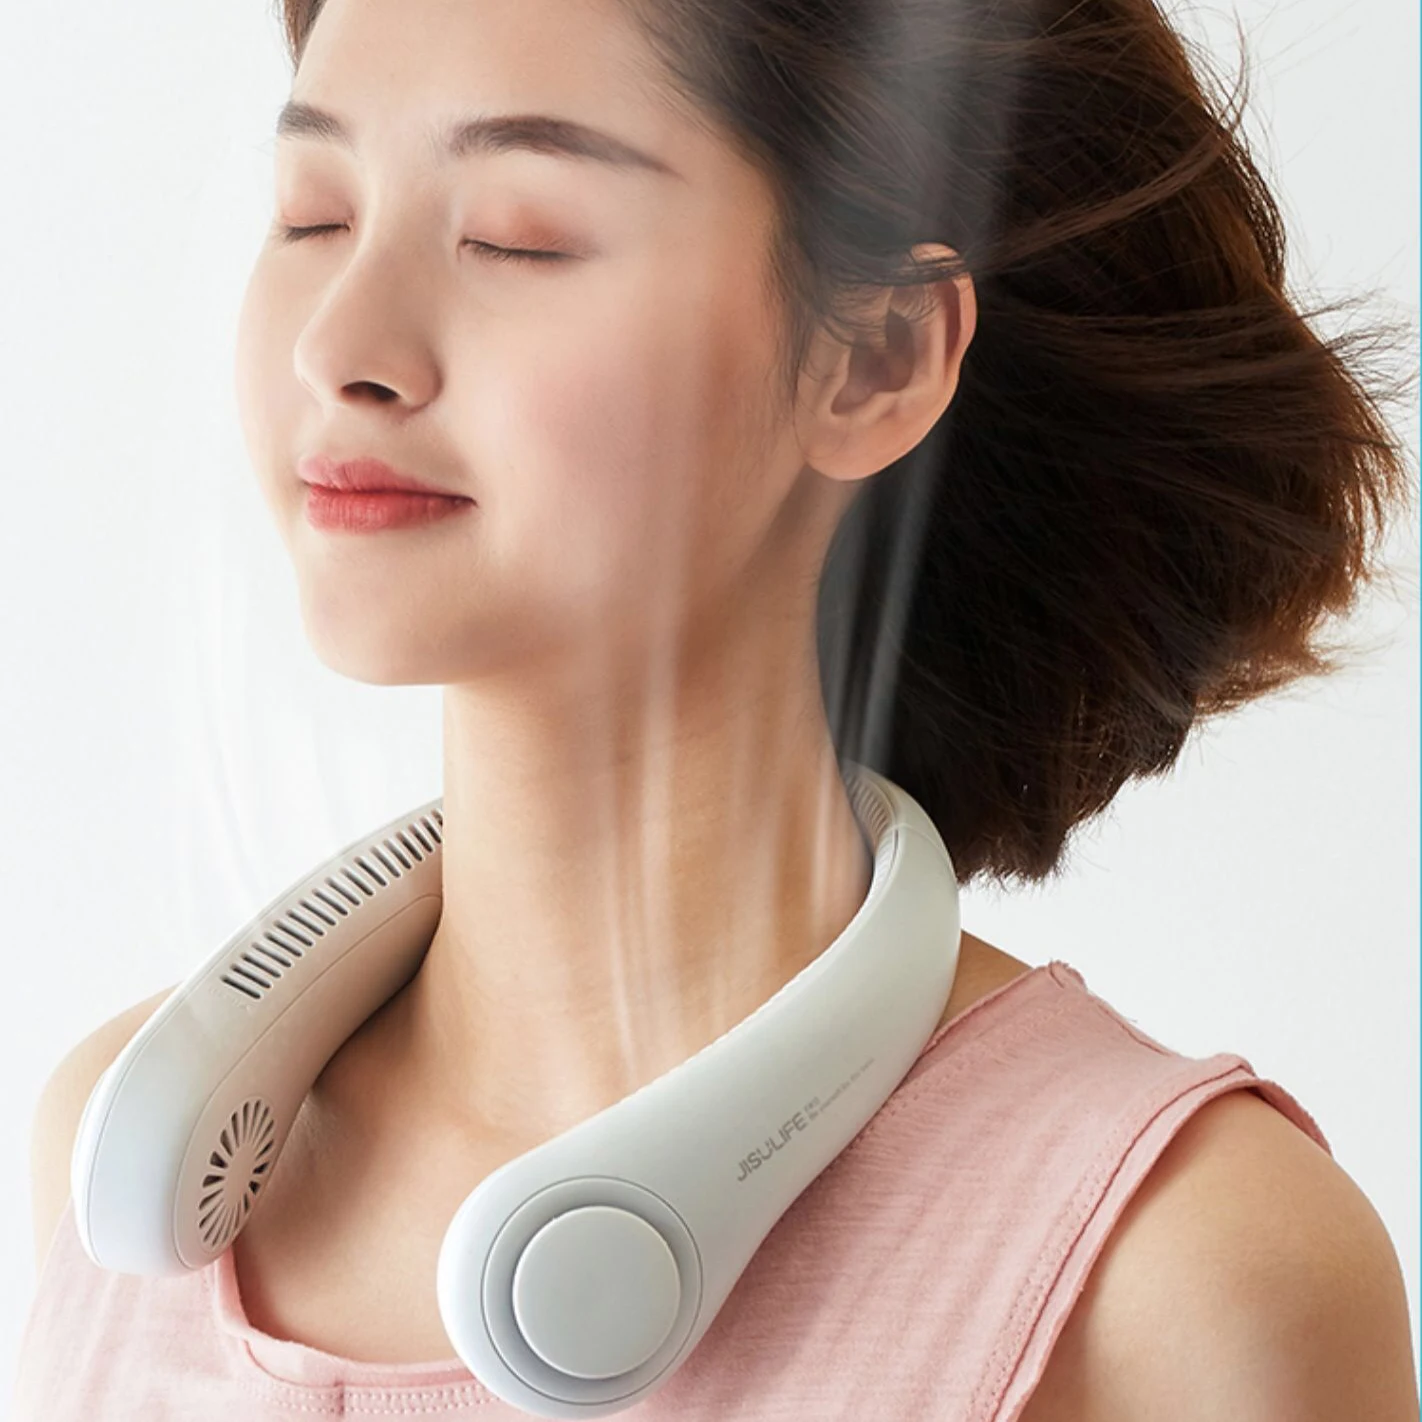 Rechargeable Hands Free Leafless Bladeless 2000 mAh Battery Operated Wearable Personal Portable Neck Headphone fan